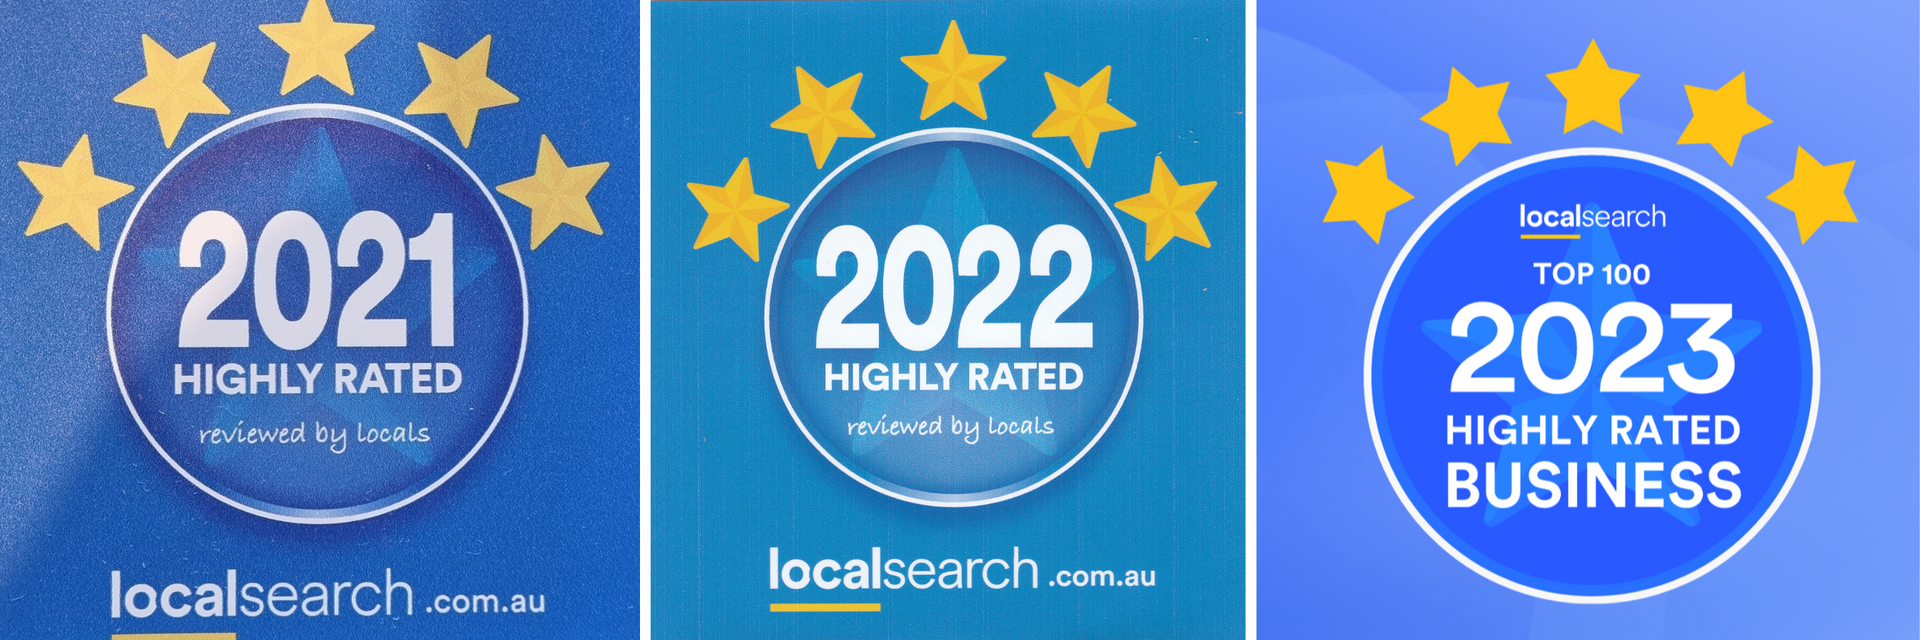 Localsearch Highly Rated Business 3 Years in a row!